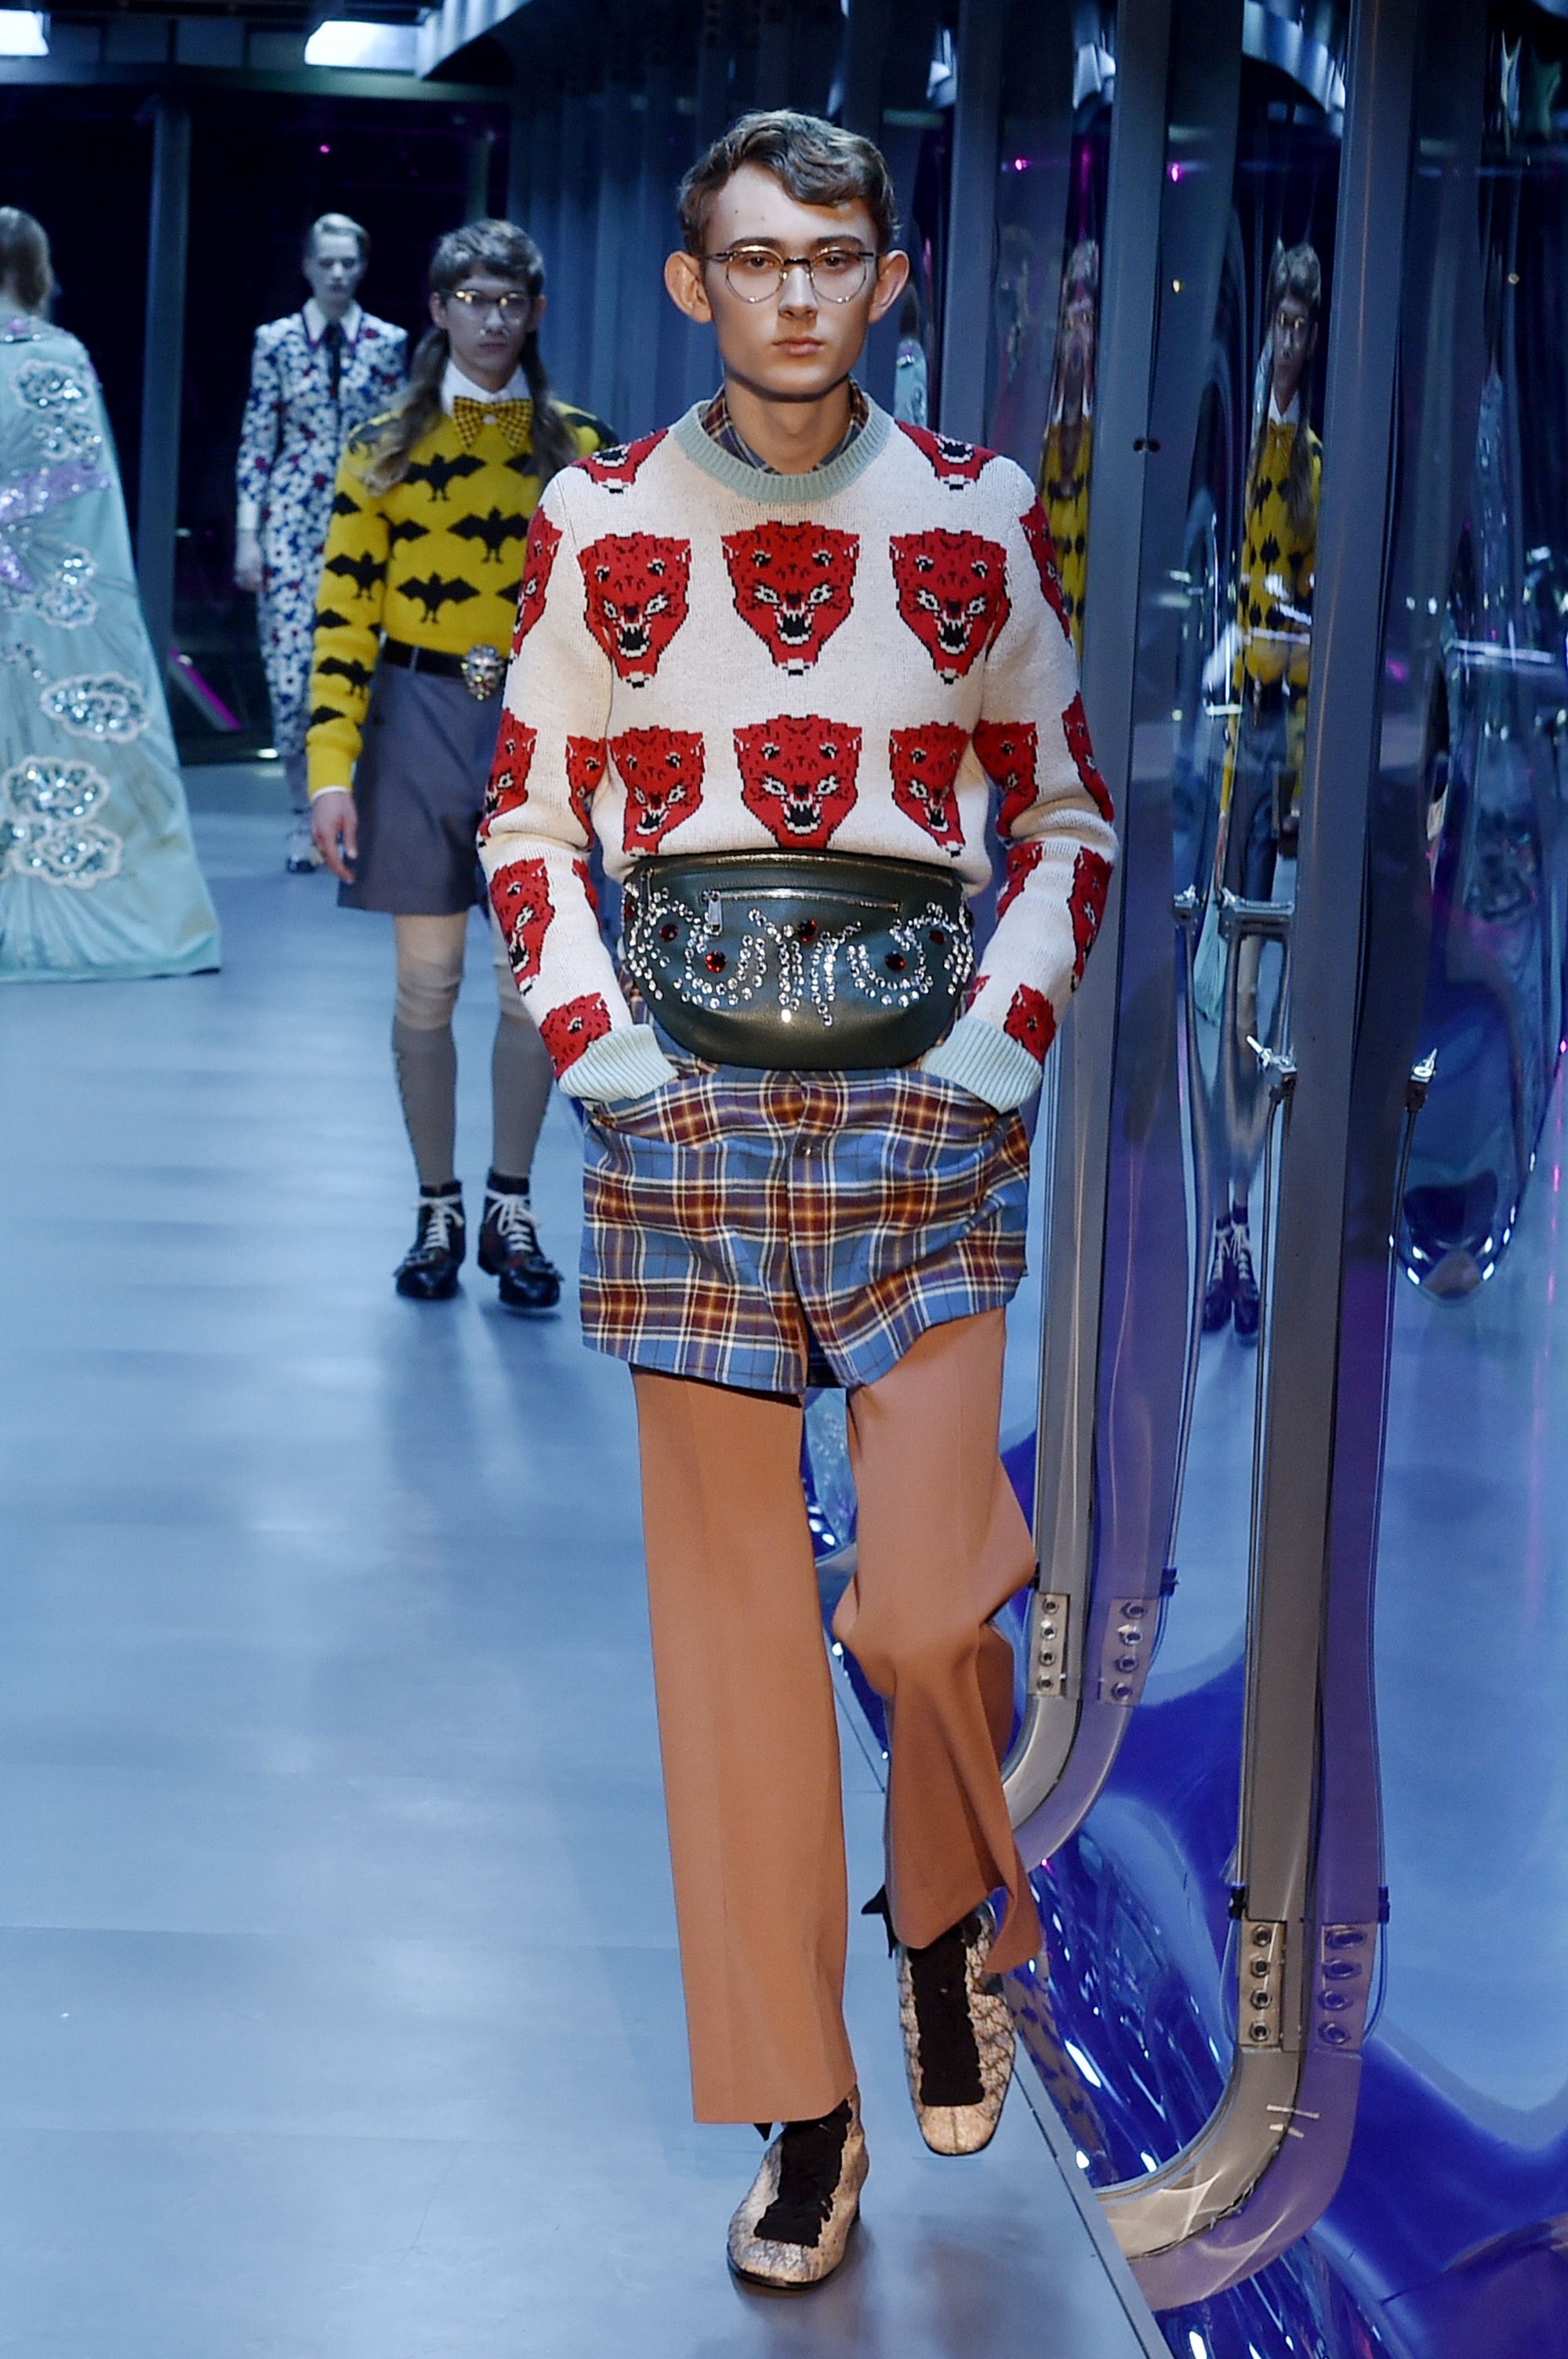 Meet the trans and androgynous models who stole the show at Louis Vuitton  Womenswear